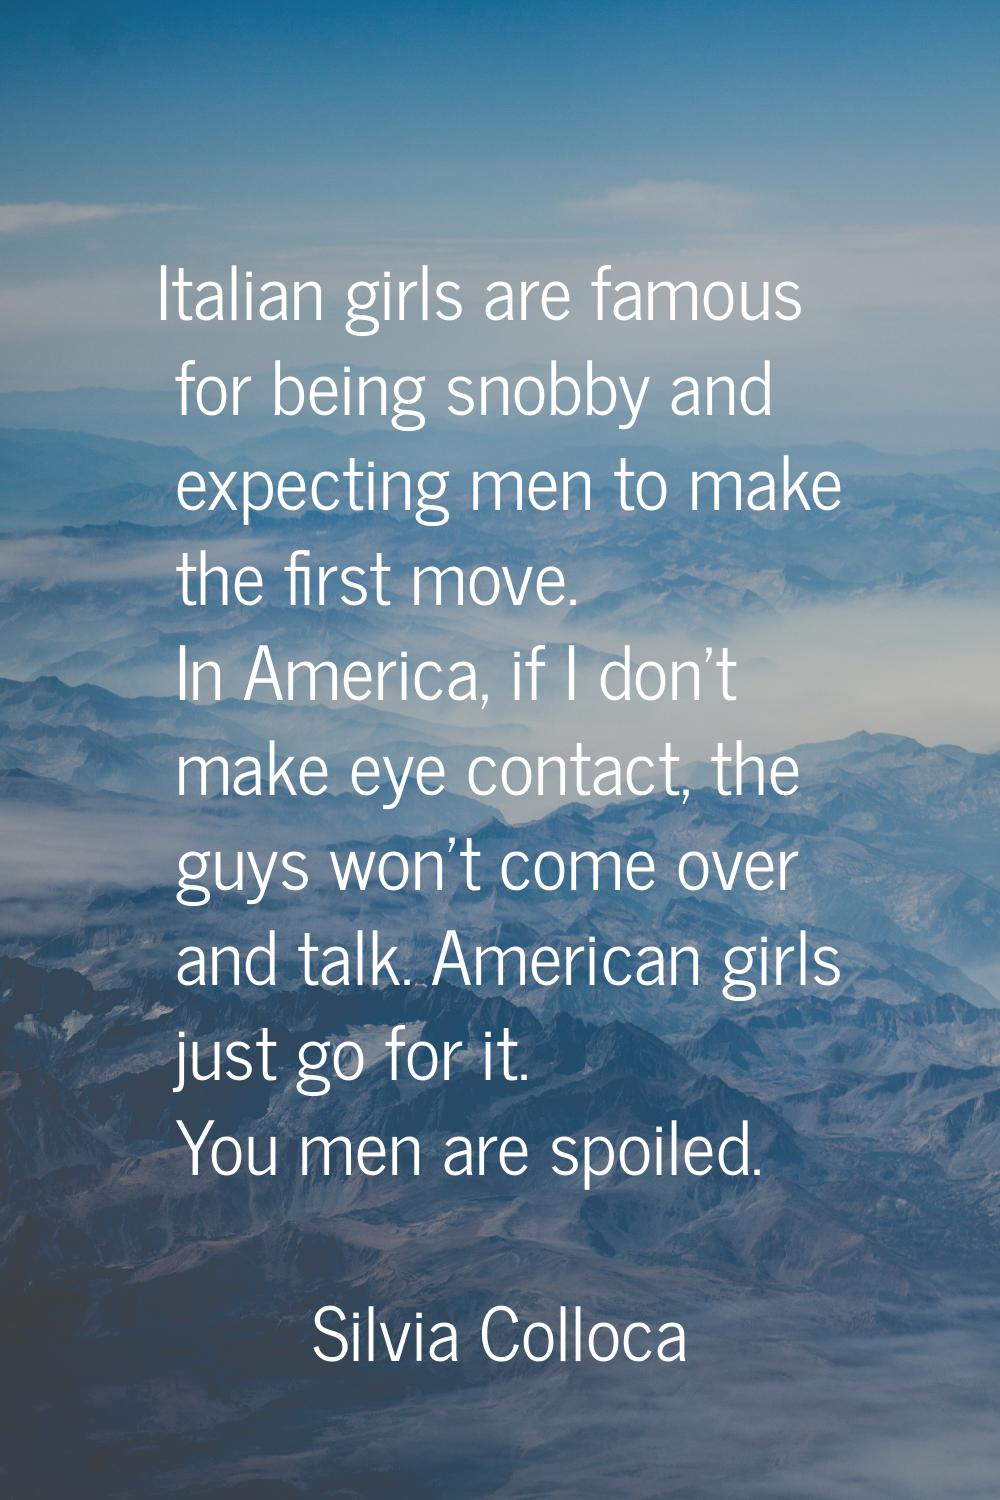 Italian girls are famous for being snobby and expecting men to make the first move. In America, if 